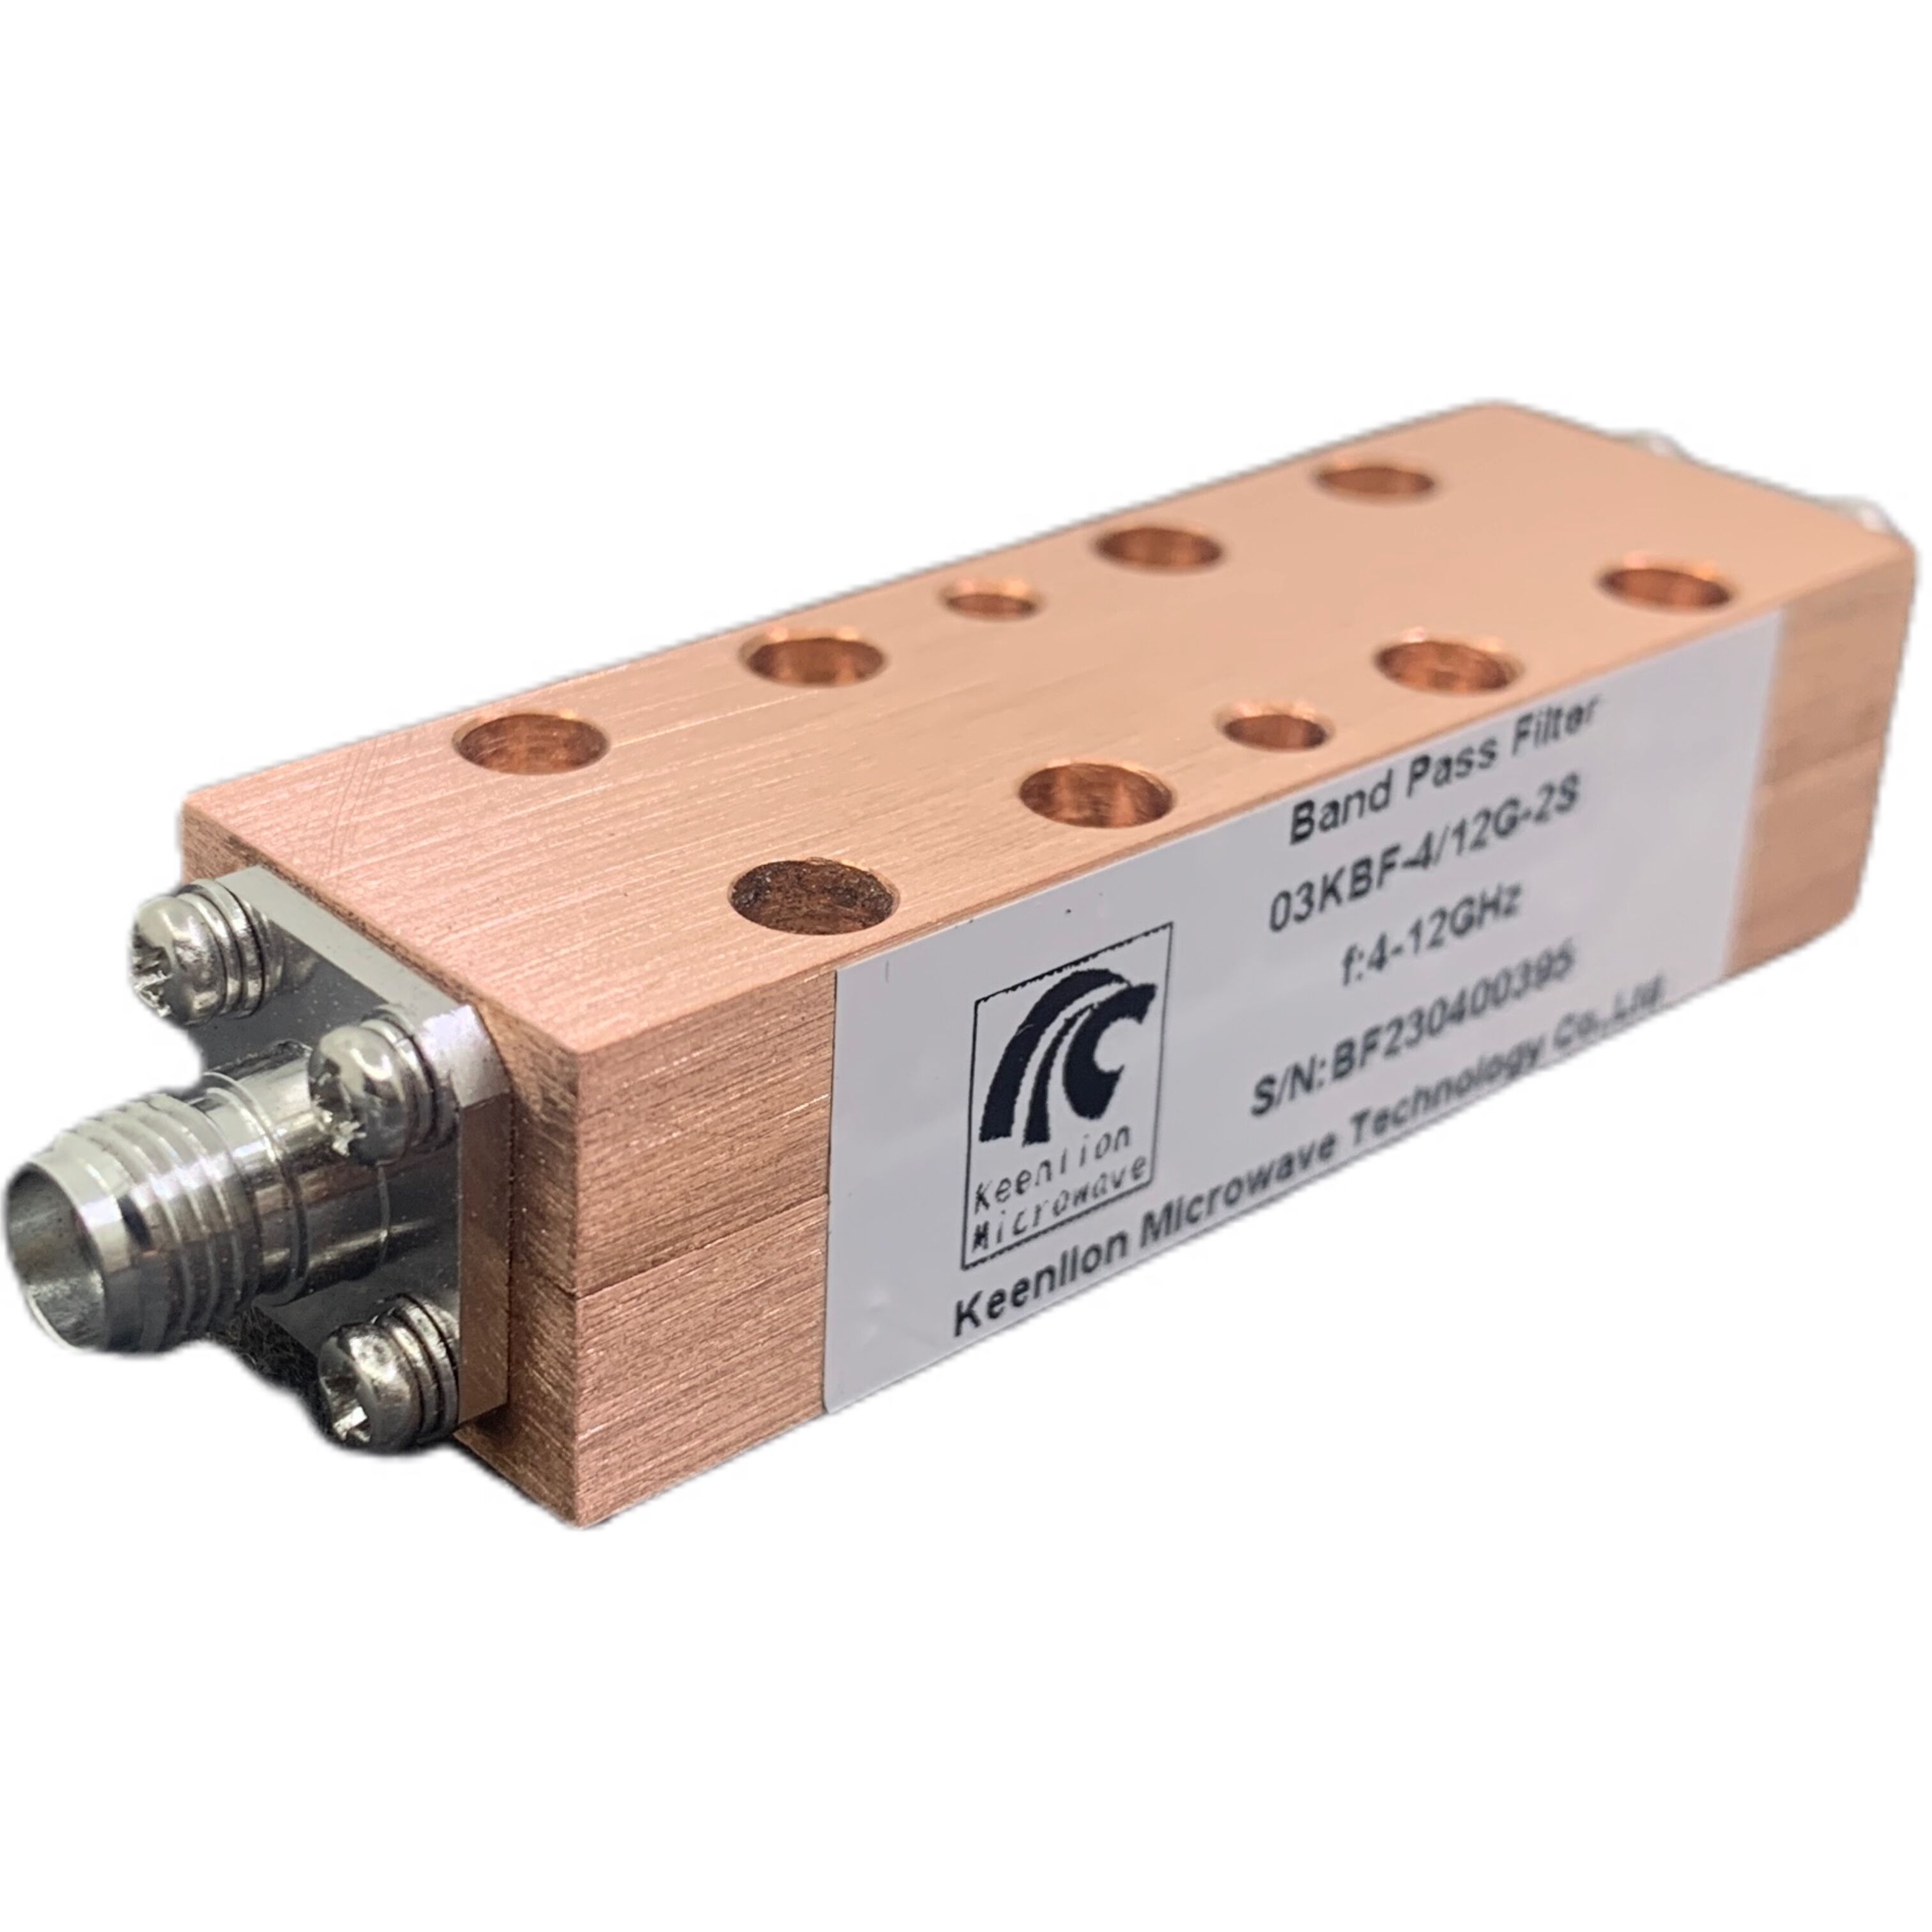 Manufacture Supply Customized RF Cavity Filter 4-12GHZ Band Pass Filter